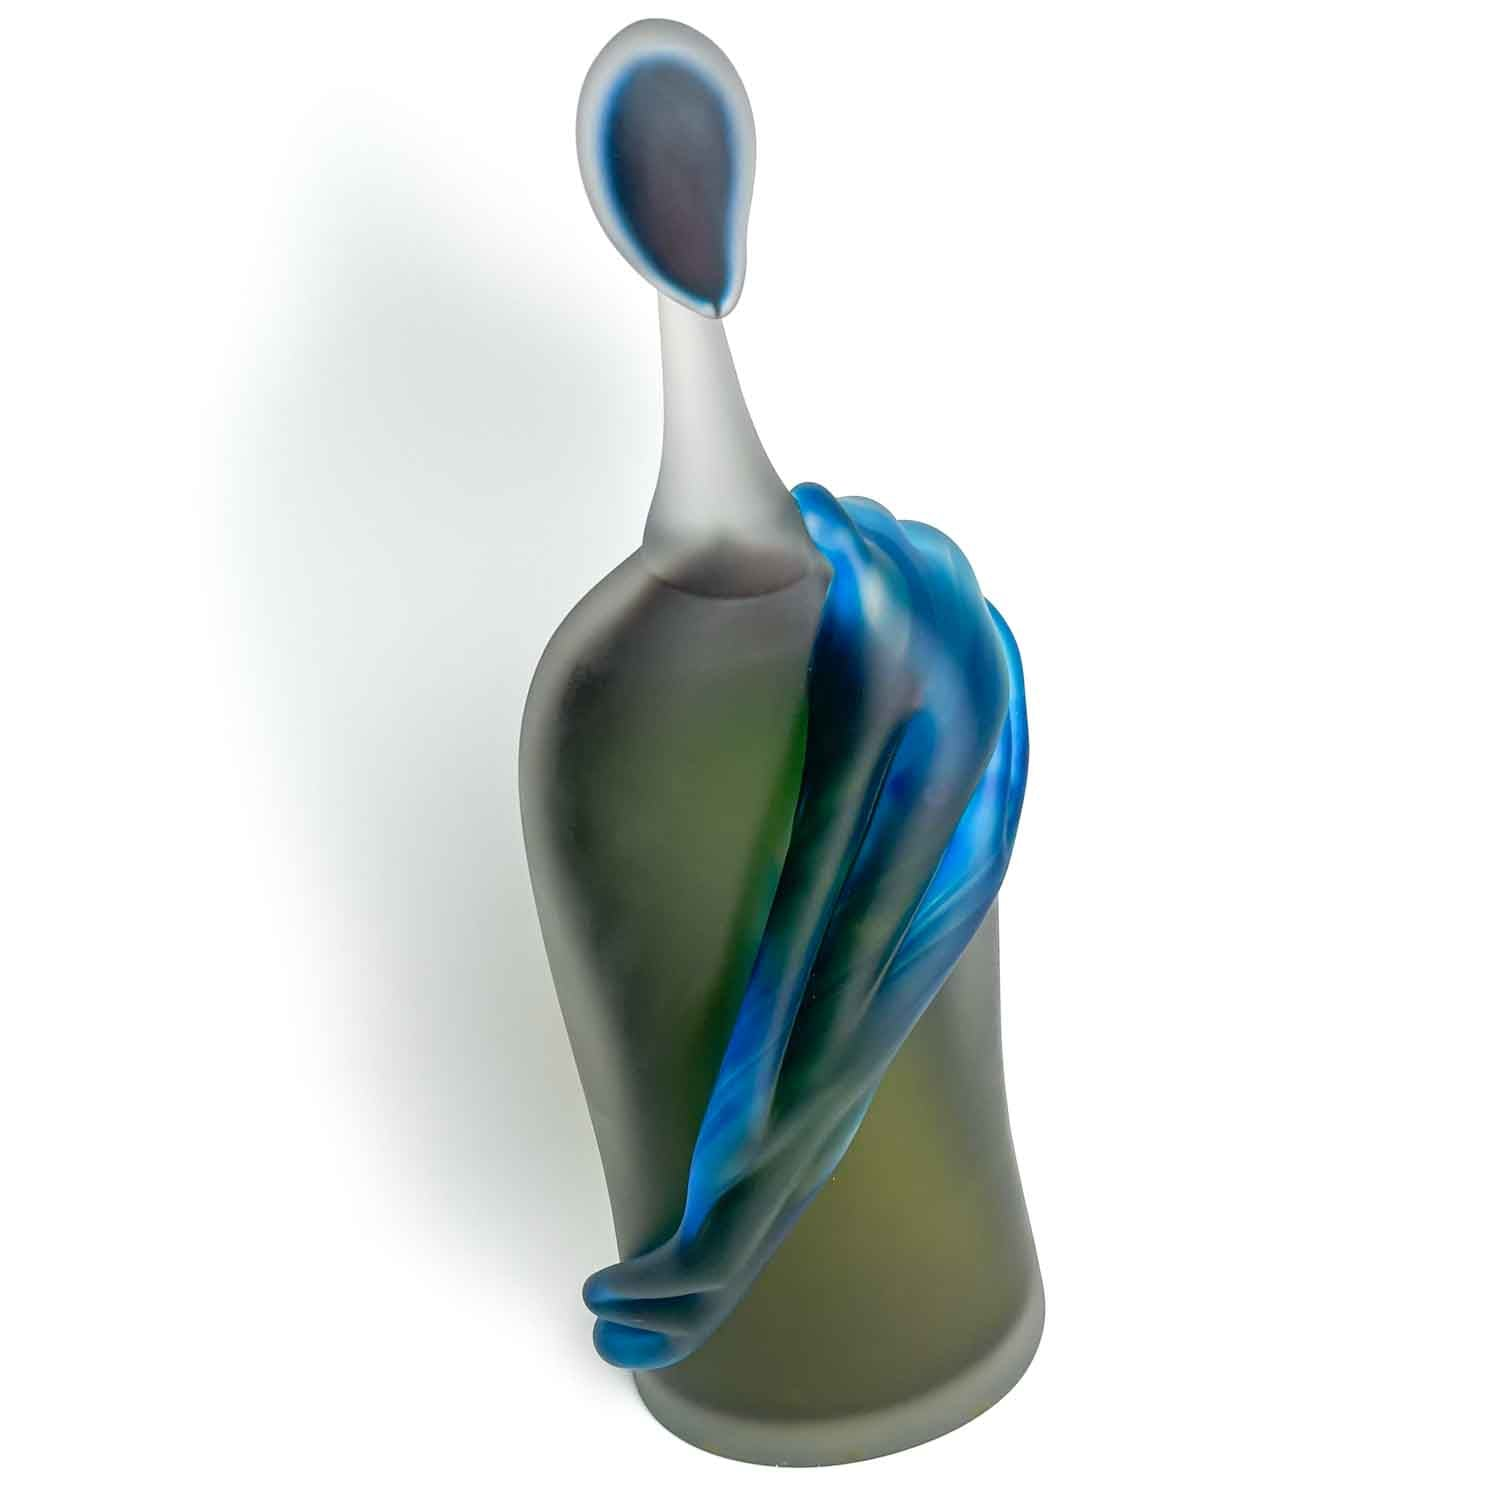 What Makes Murano Glass Décor A Must-Have?